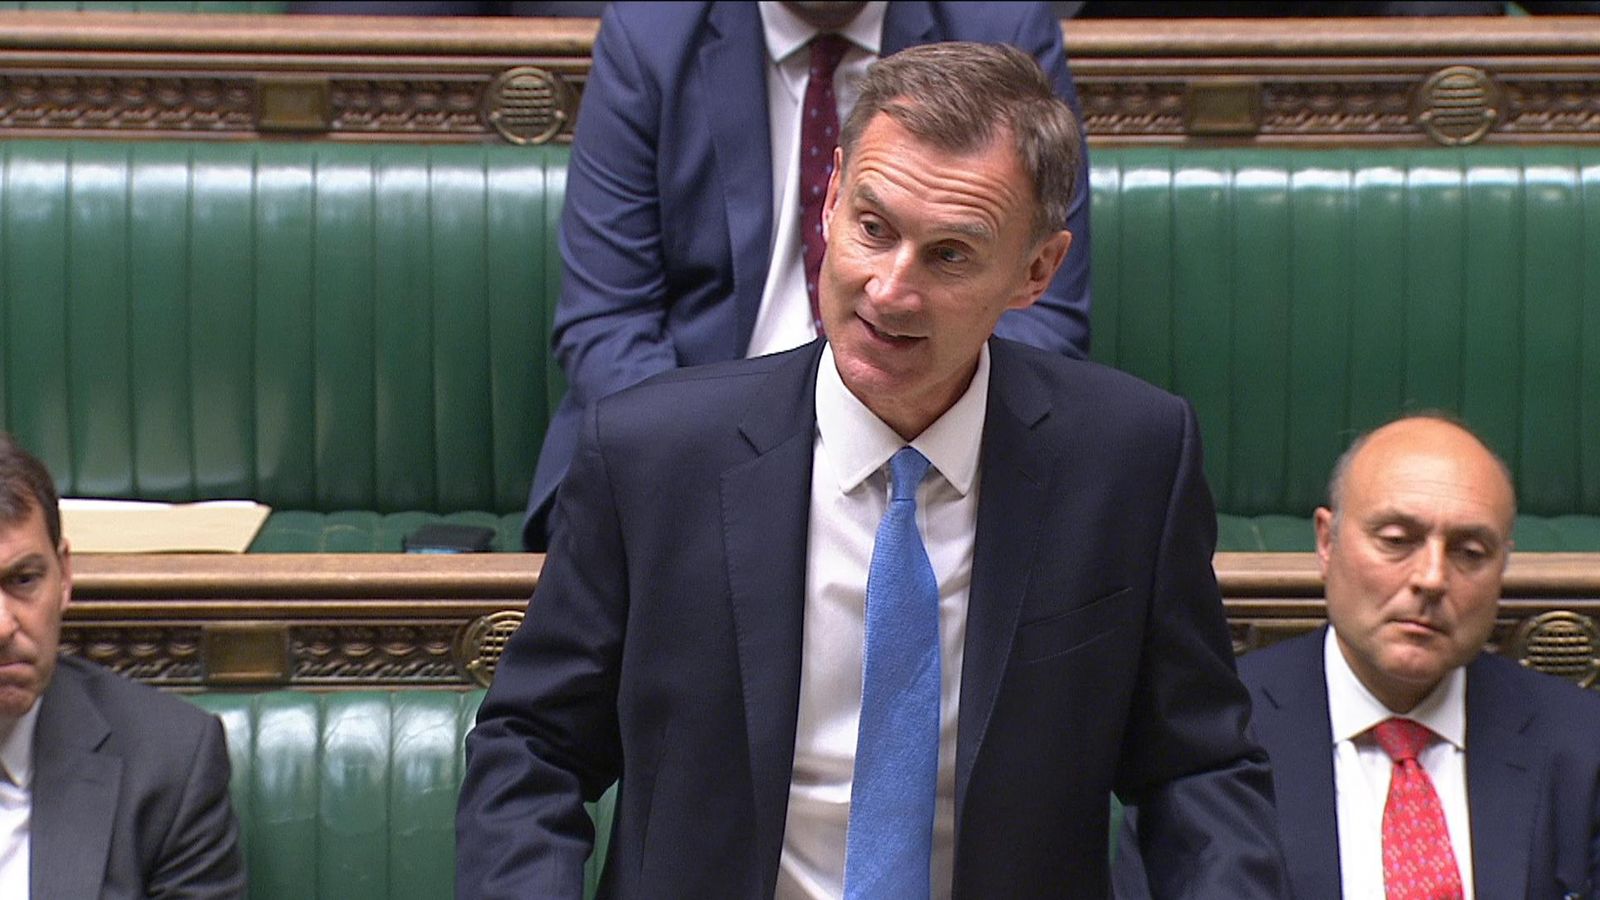 Autumn statement: Chancellor Jeremy Hunt to claim economy is 'back on track'